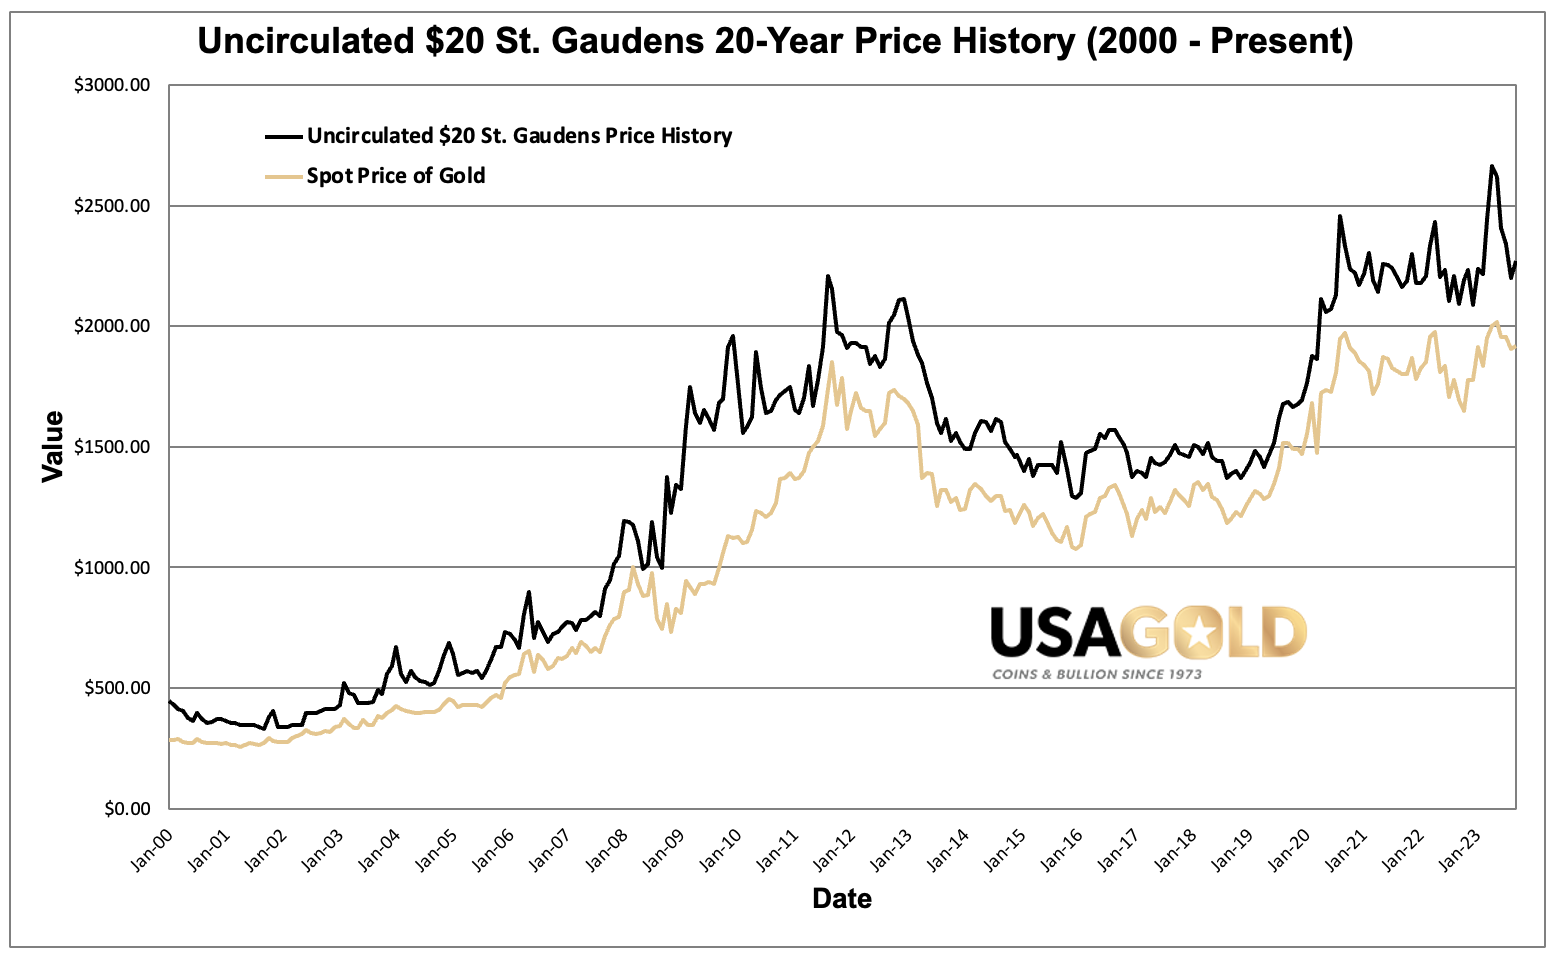 Graph of the price performance of the Uncirculated $20 St. Gaudens from year 2000 to present. Also graphed is the spot price of gold over the same period.